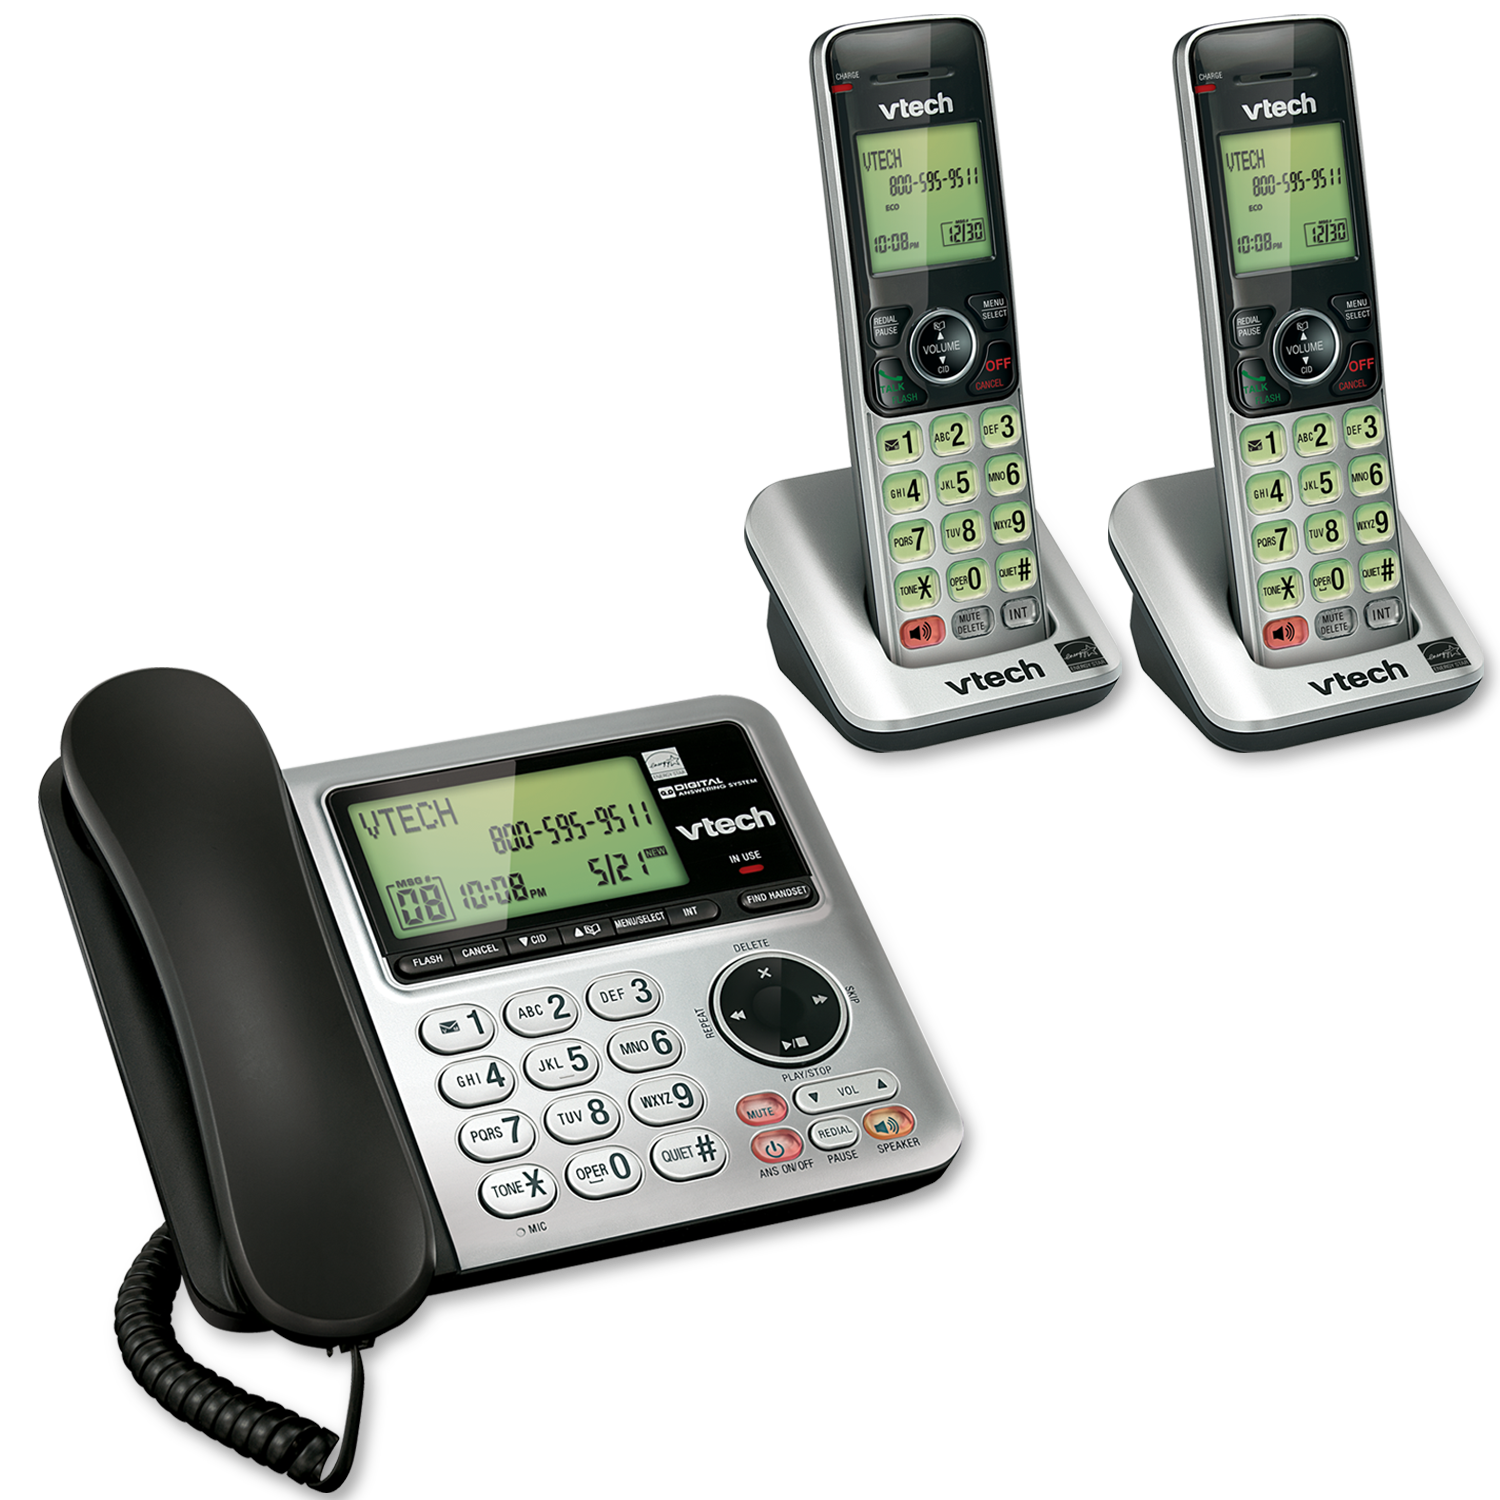 2 Handset Answering System with Caller ID/Call Waiting